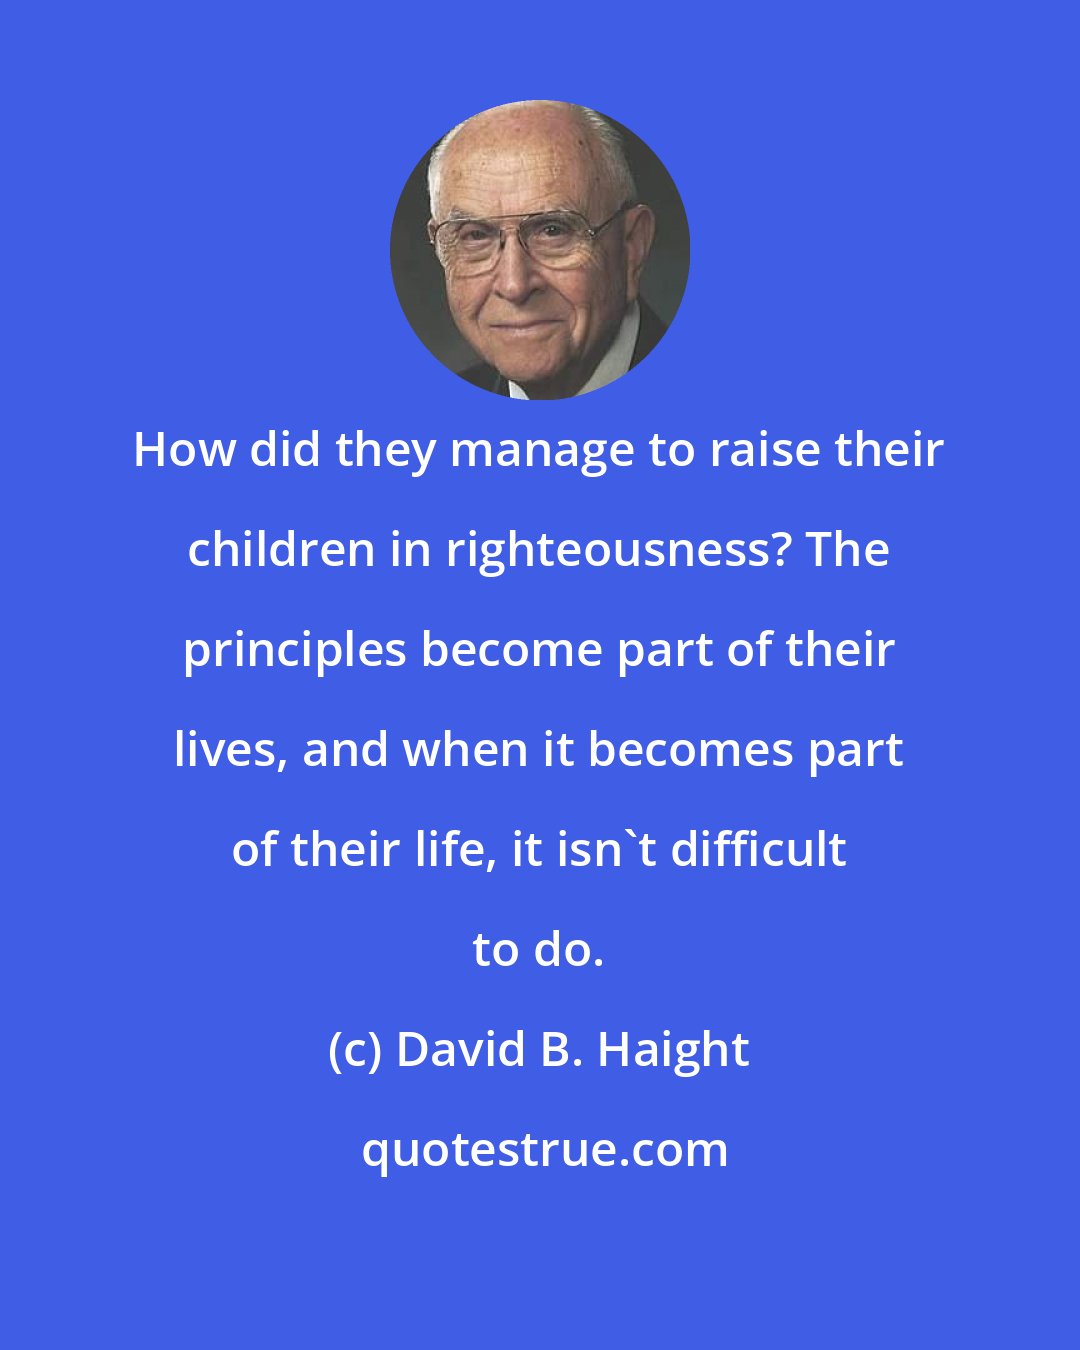 David B. Haight: How did they manage to raise their children in righteousness? The principles become part of their lives, and when it becomes part of their life, it isn't difficult to do.